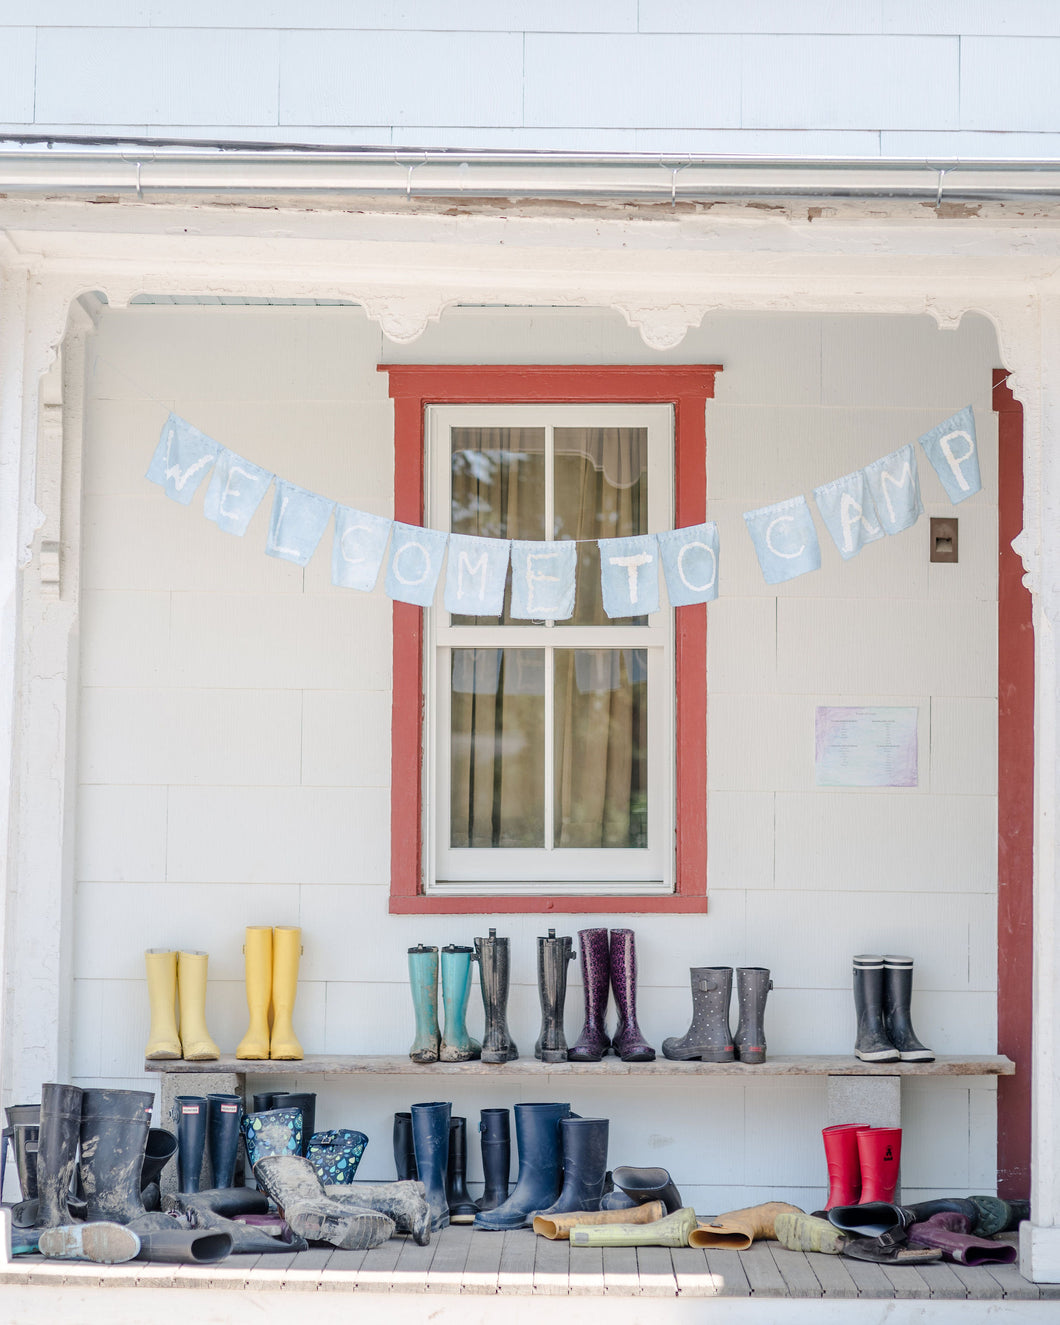 Porch with mudboots and welcome banner